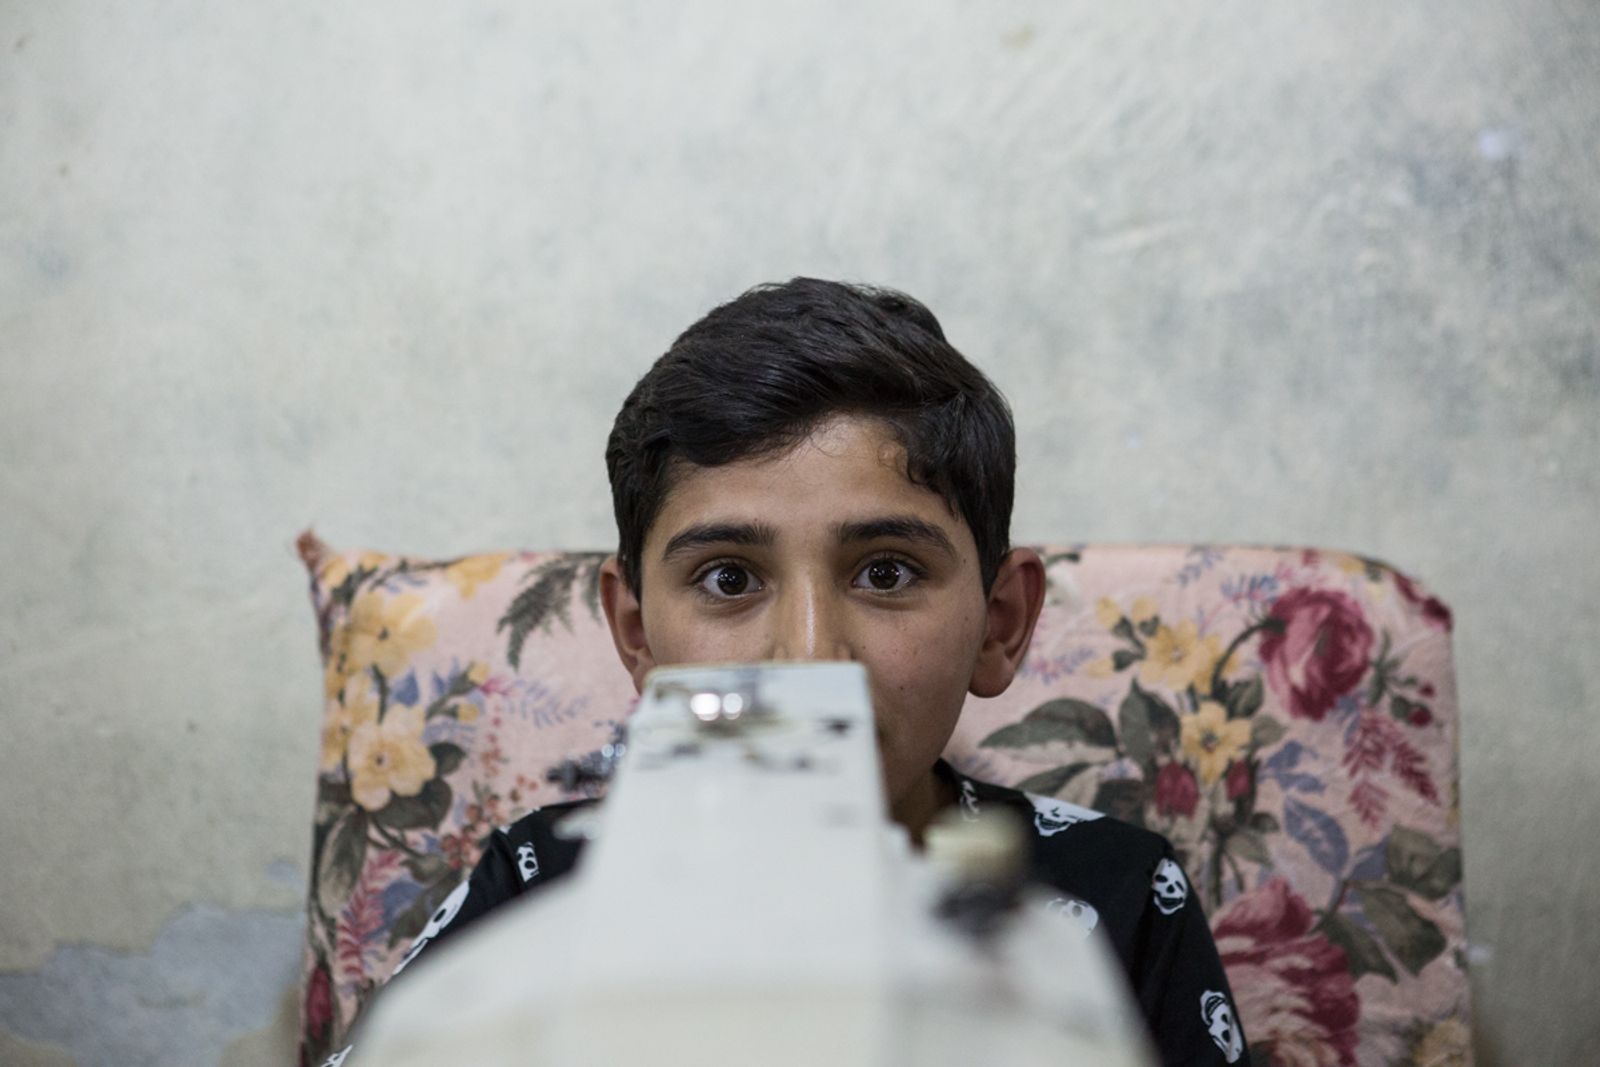 © Valerio Muscella - A 12 years old Syrian boy sews 10 hours a day in a Syrian textile workshop in Gaziantep. Turkey. May 2016.